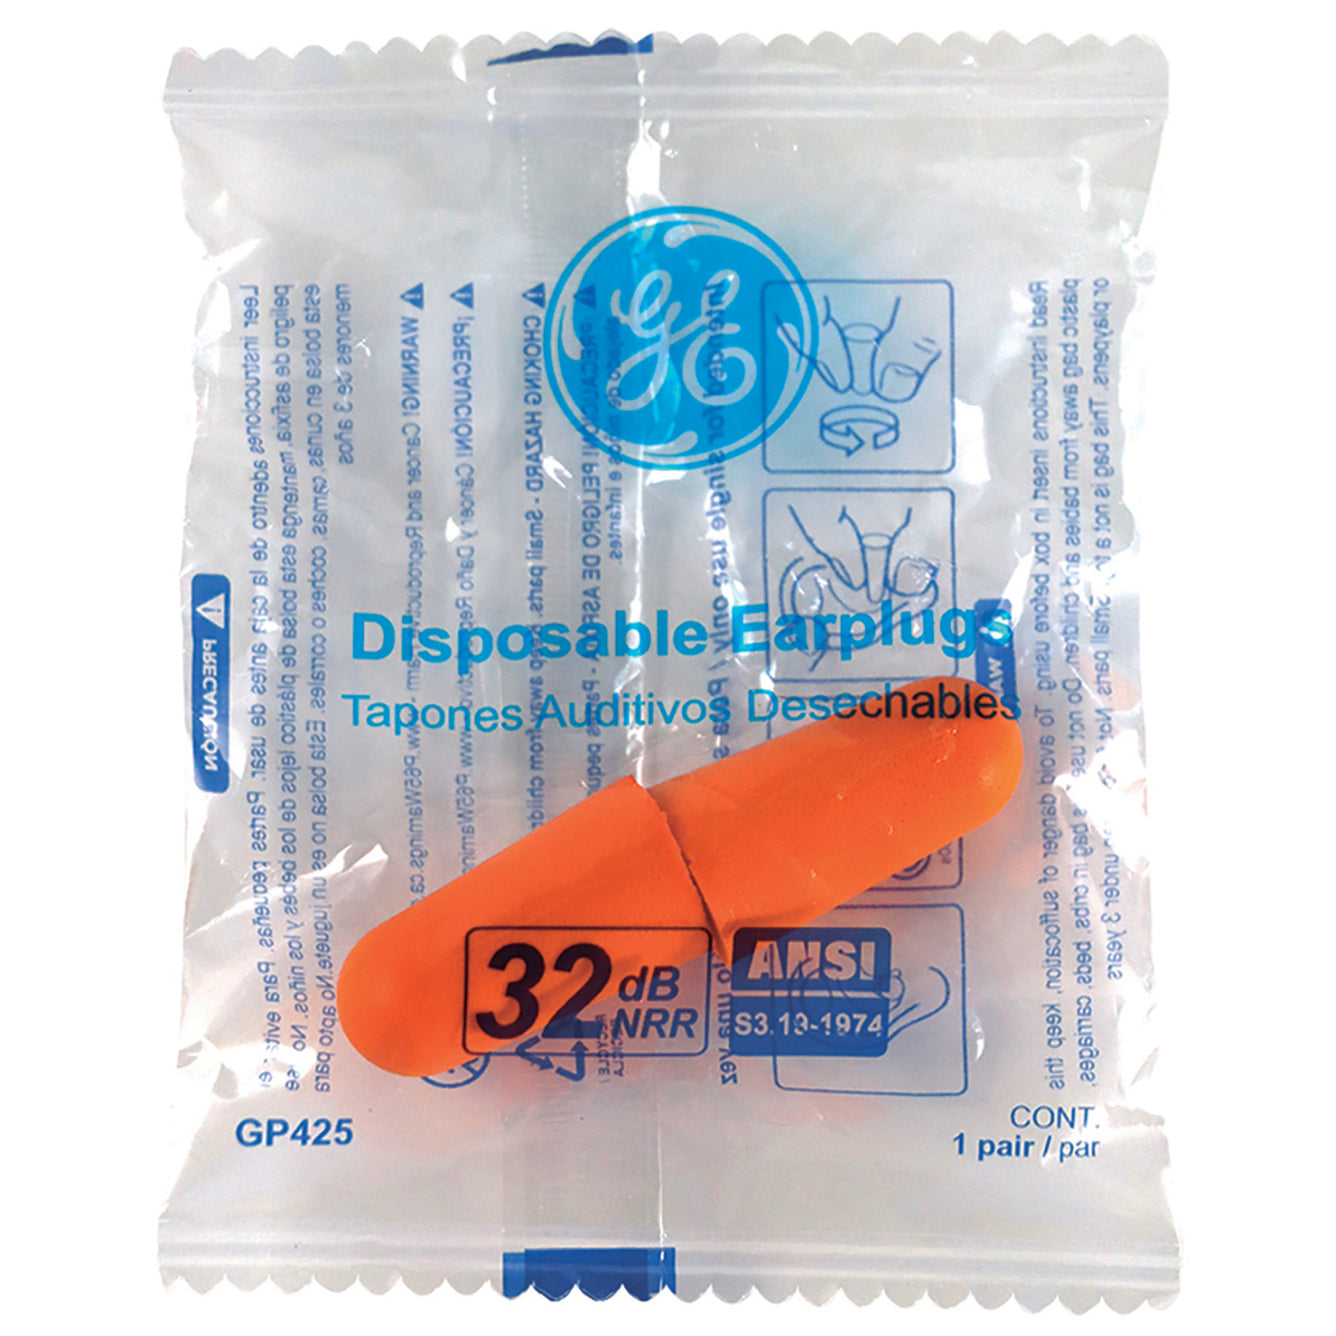 GE PPE - #GP425 BULLET SHAPED DISPOSABLE EARPLUG 200 PAIRS - uncorded